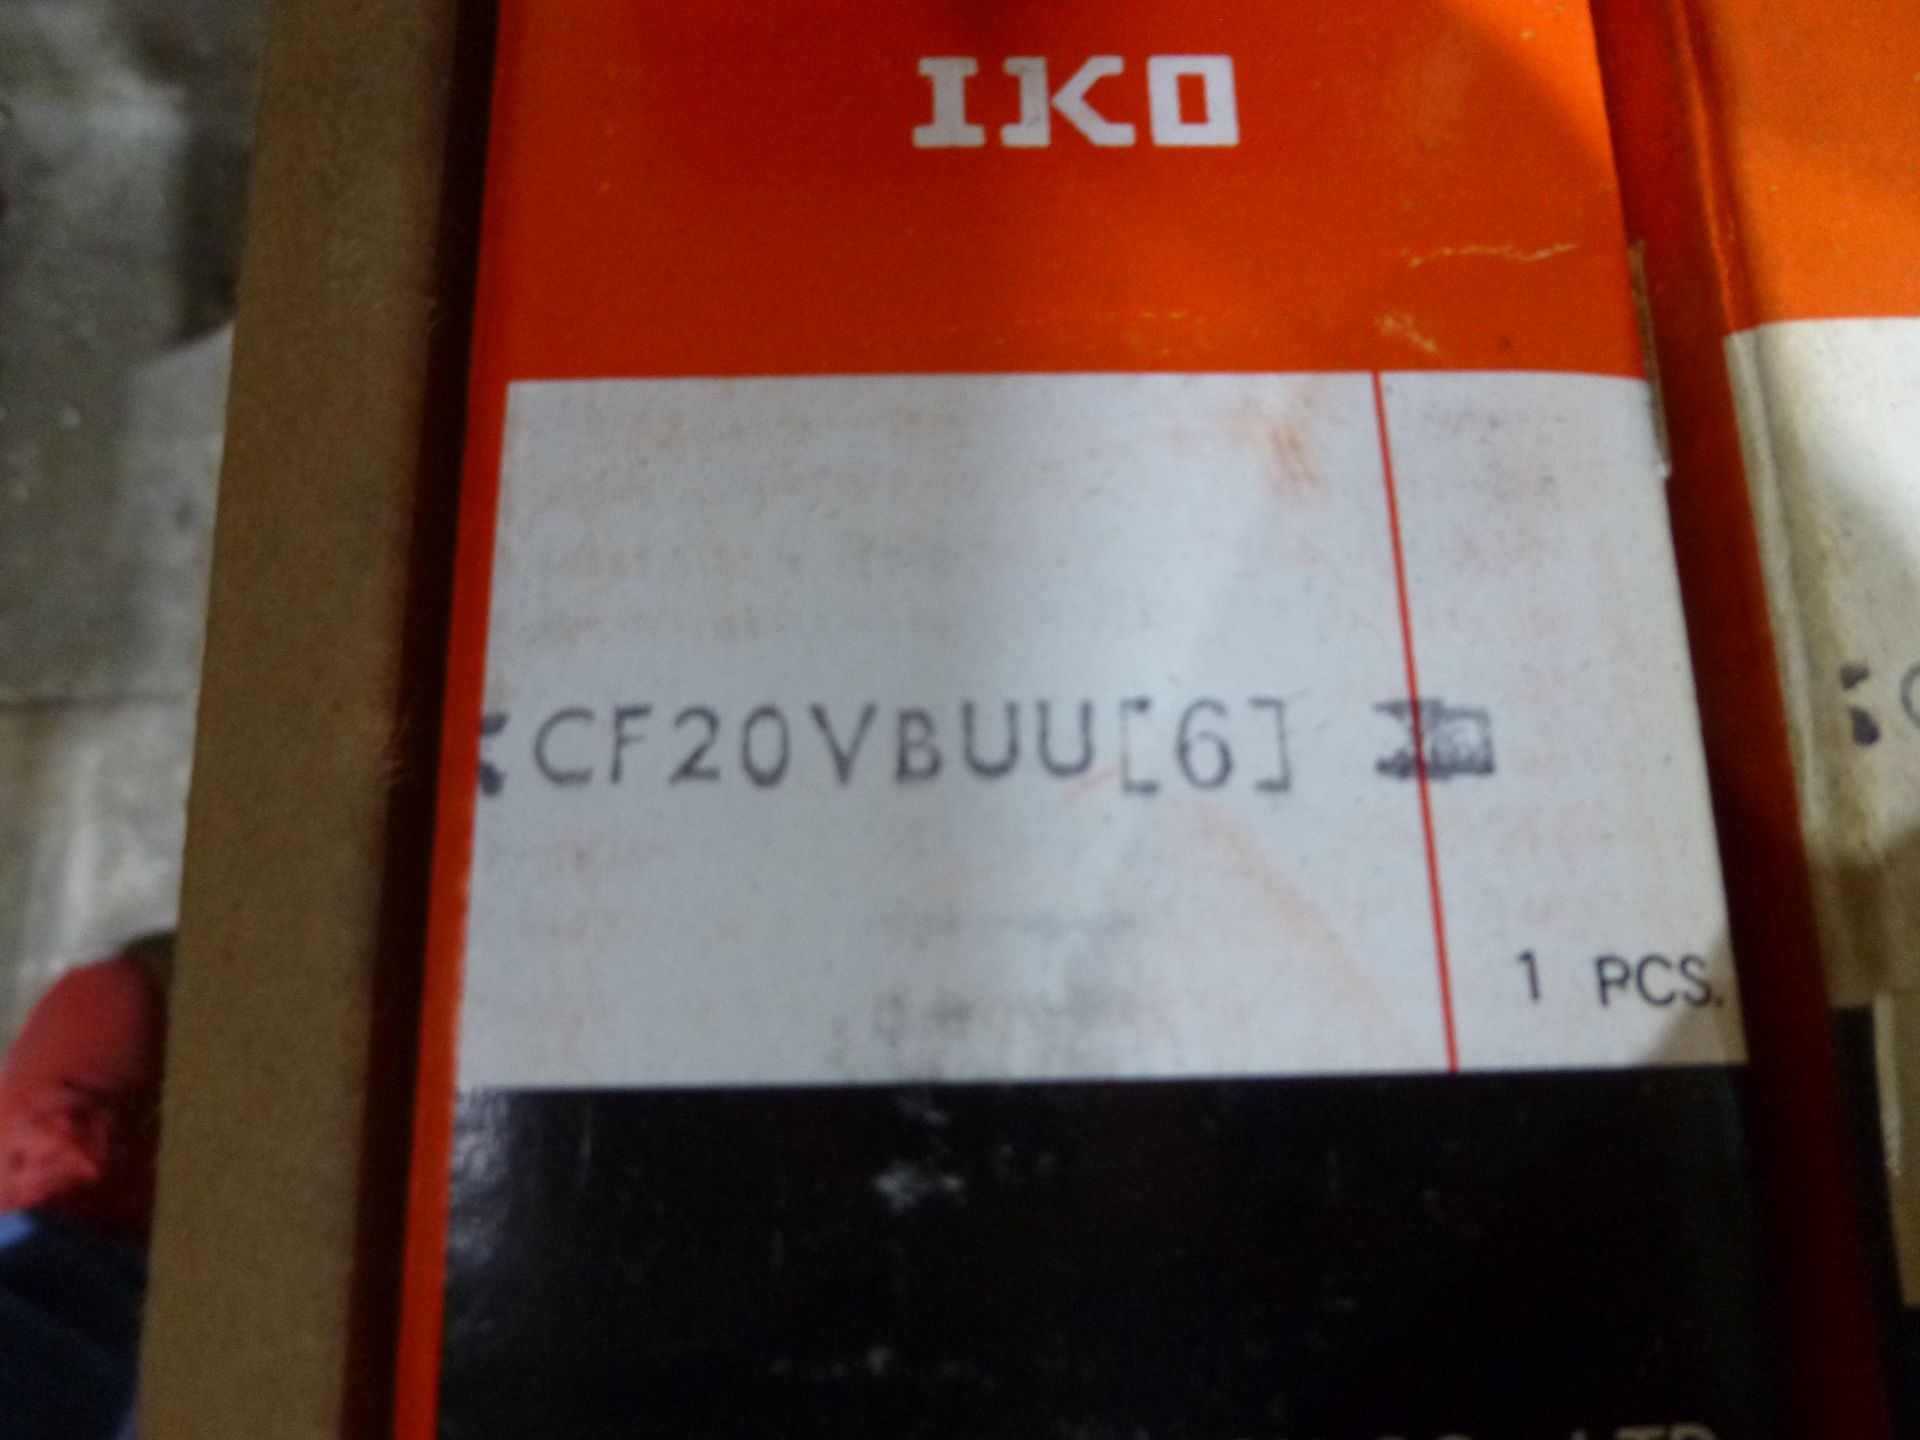 Qty 6 IKO bearings CF20VBUU/6, as always with Brolyn LLC auctions, all lots can be picked up from - Image 2 of 2